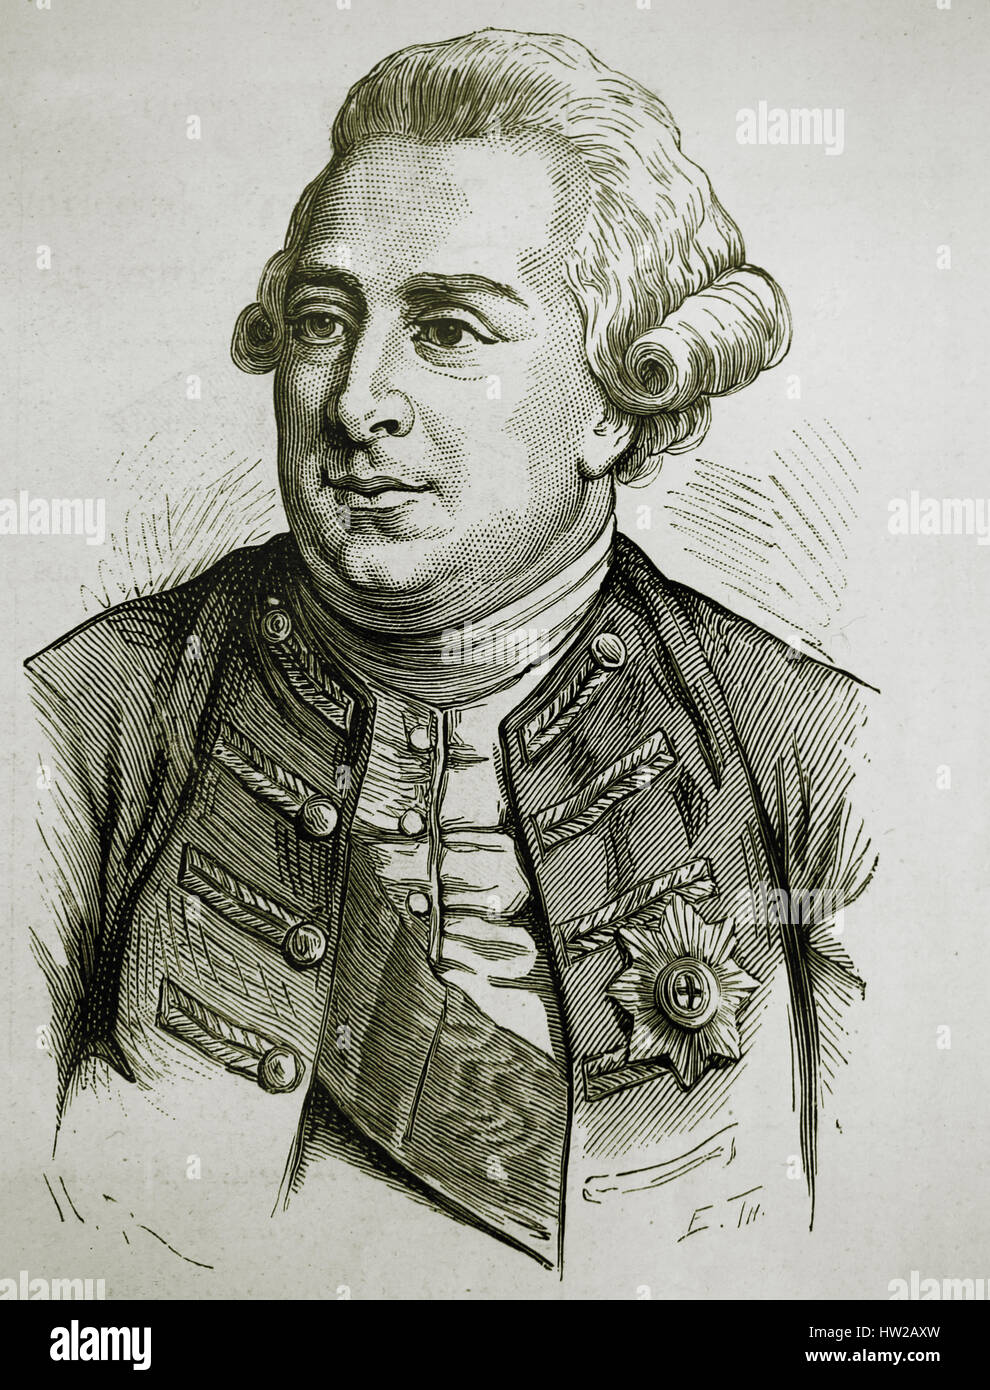 George III (1738-1820). King of Great Britain, Ireland later King of the UK and of Hanover. Engraving, 1883. Stock Photo